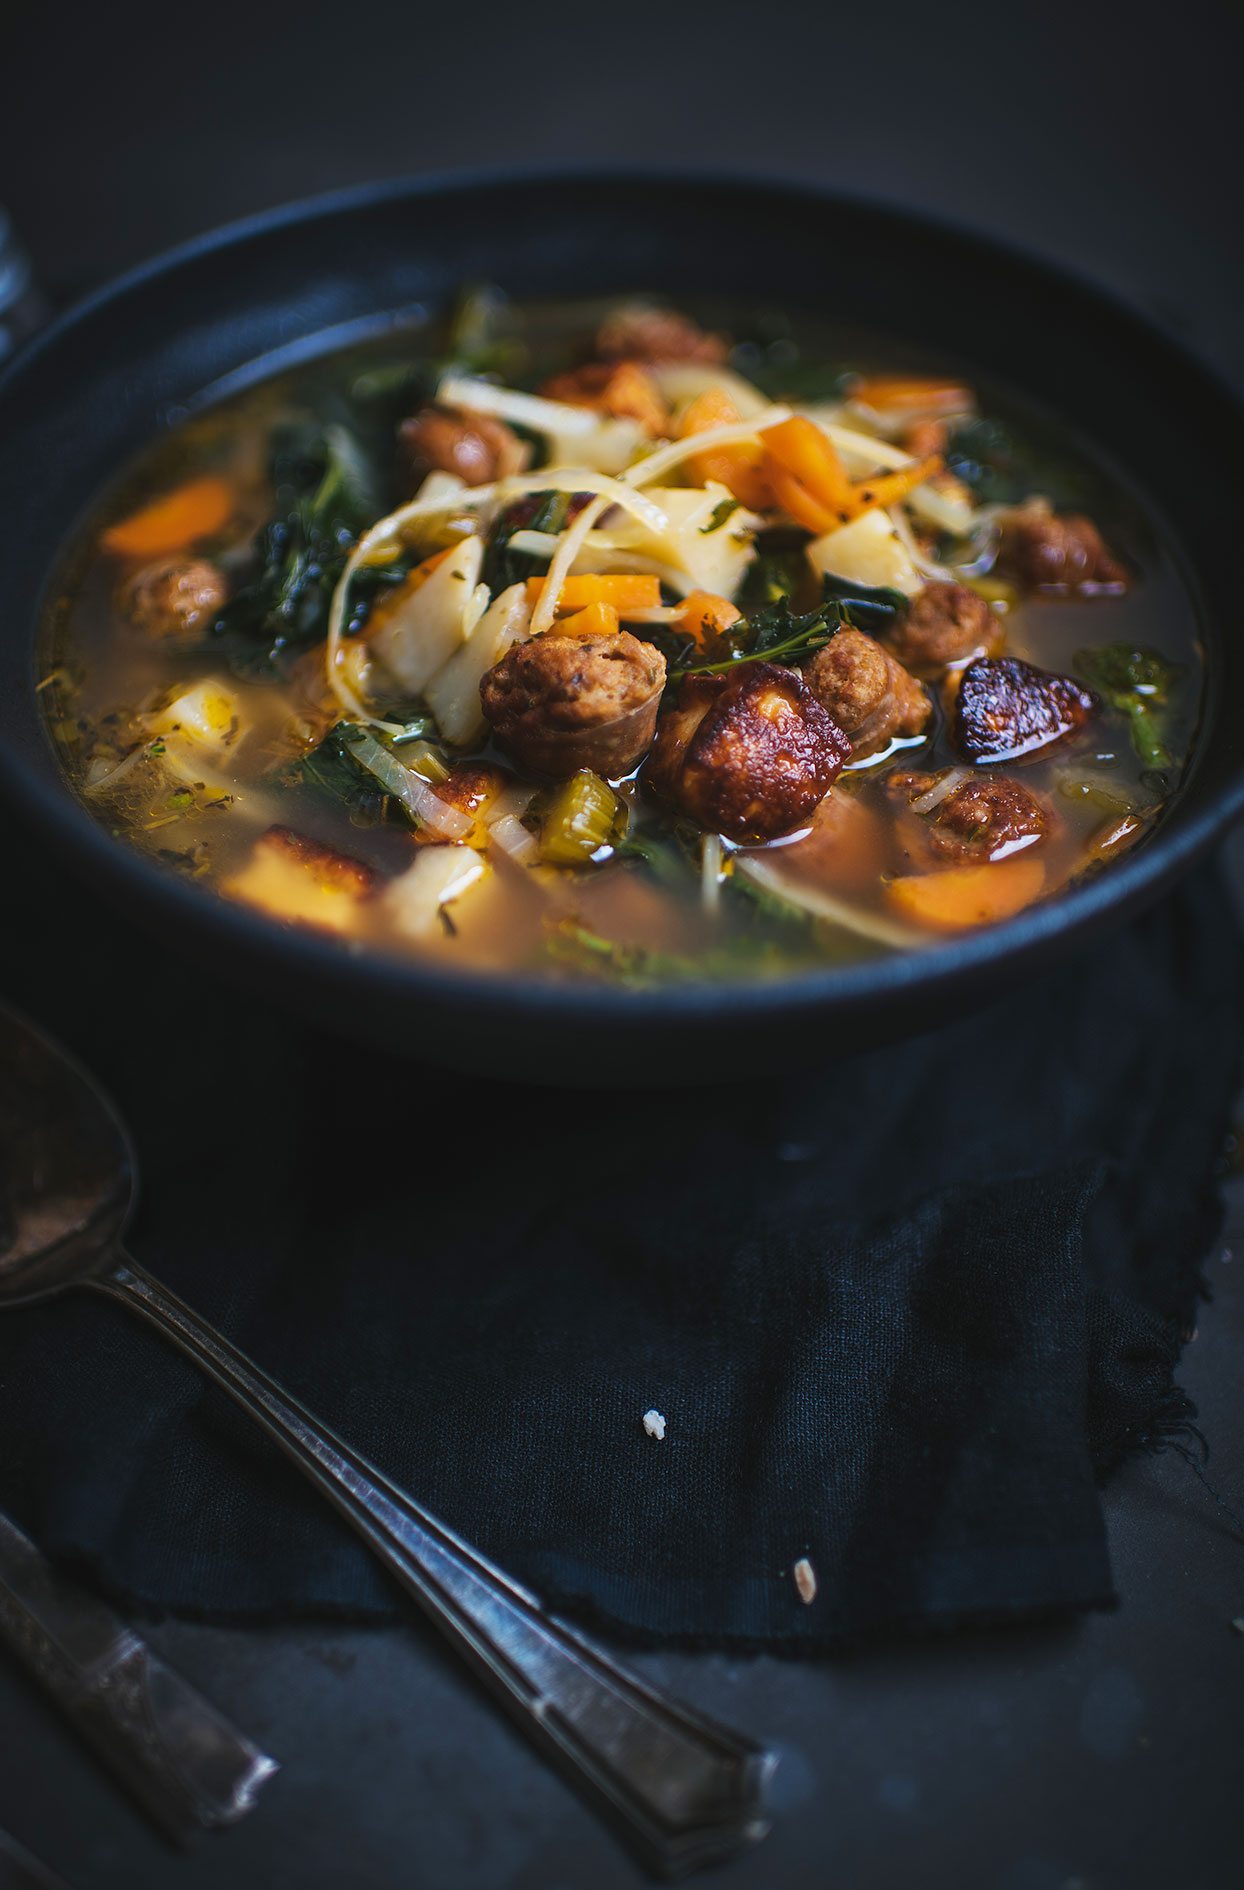 Deluxe soup with sausage, vegetables and grilled haloumi